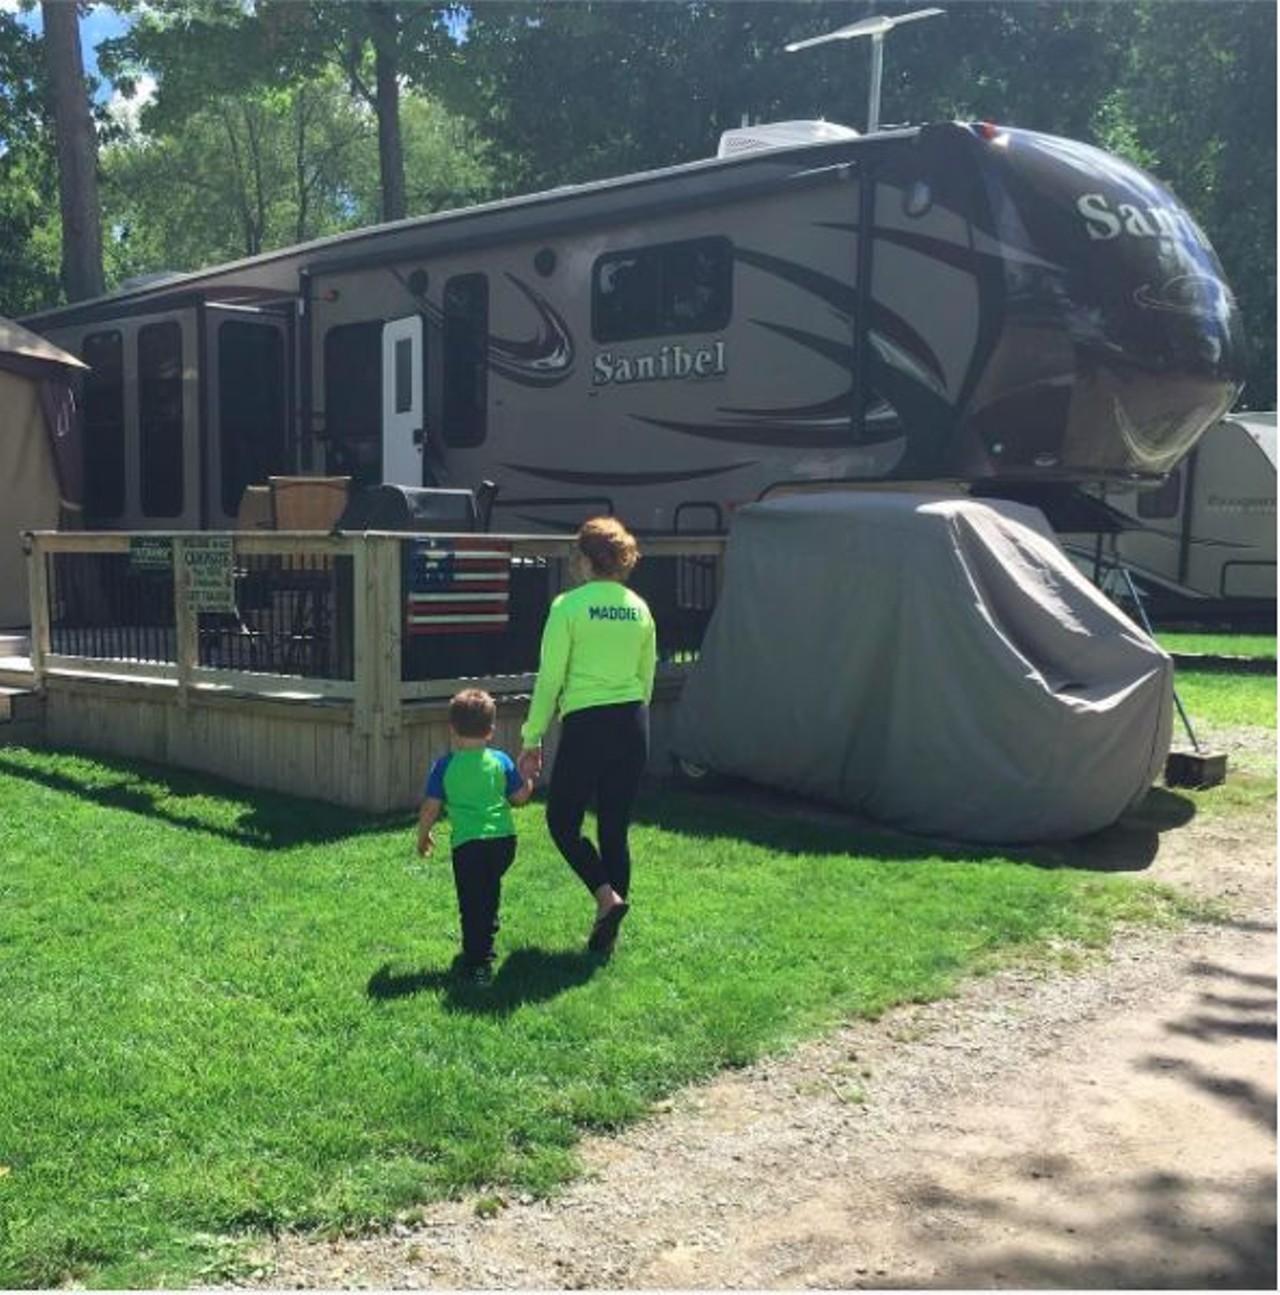 Taylor Beach Campground
Howell, MI&nbsp;
The perfect place for your next family camping trip, this campground literally has it ALL! From vollyball courts and putt putt golf to arcade games and kayak rentals, this camp has something for everyone. Also the camp is in close proximity to an outlet mall and plenty of golf courses.
Photo via Instagram user @makiahmanders